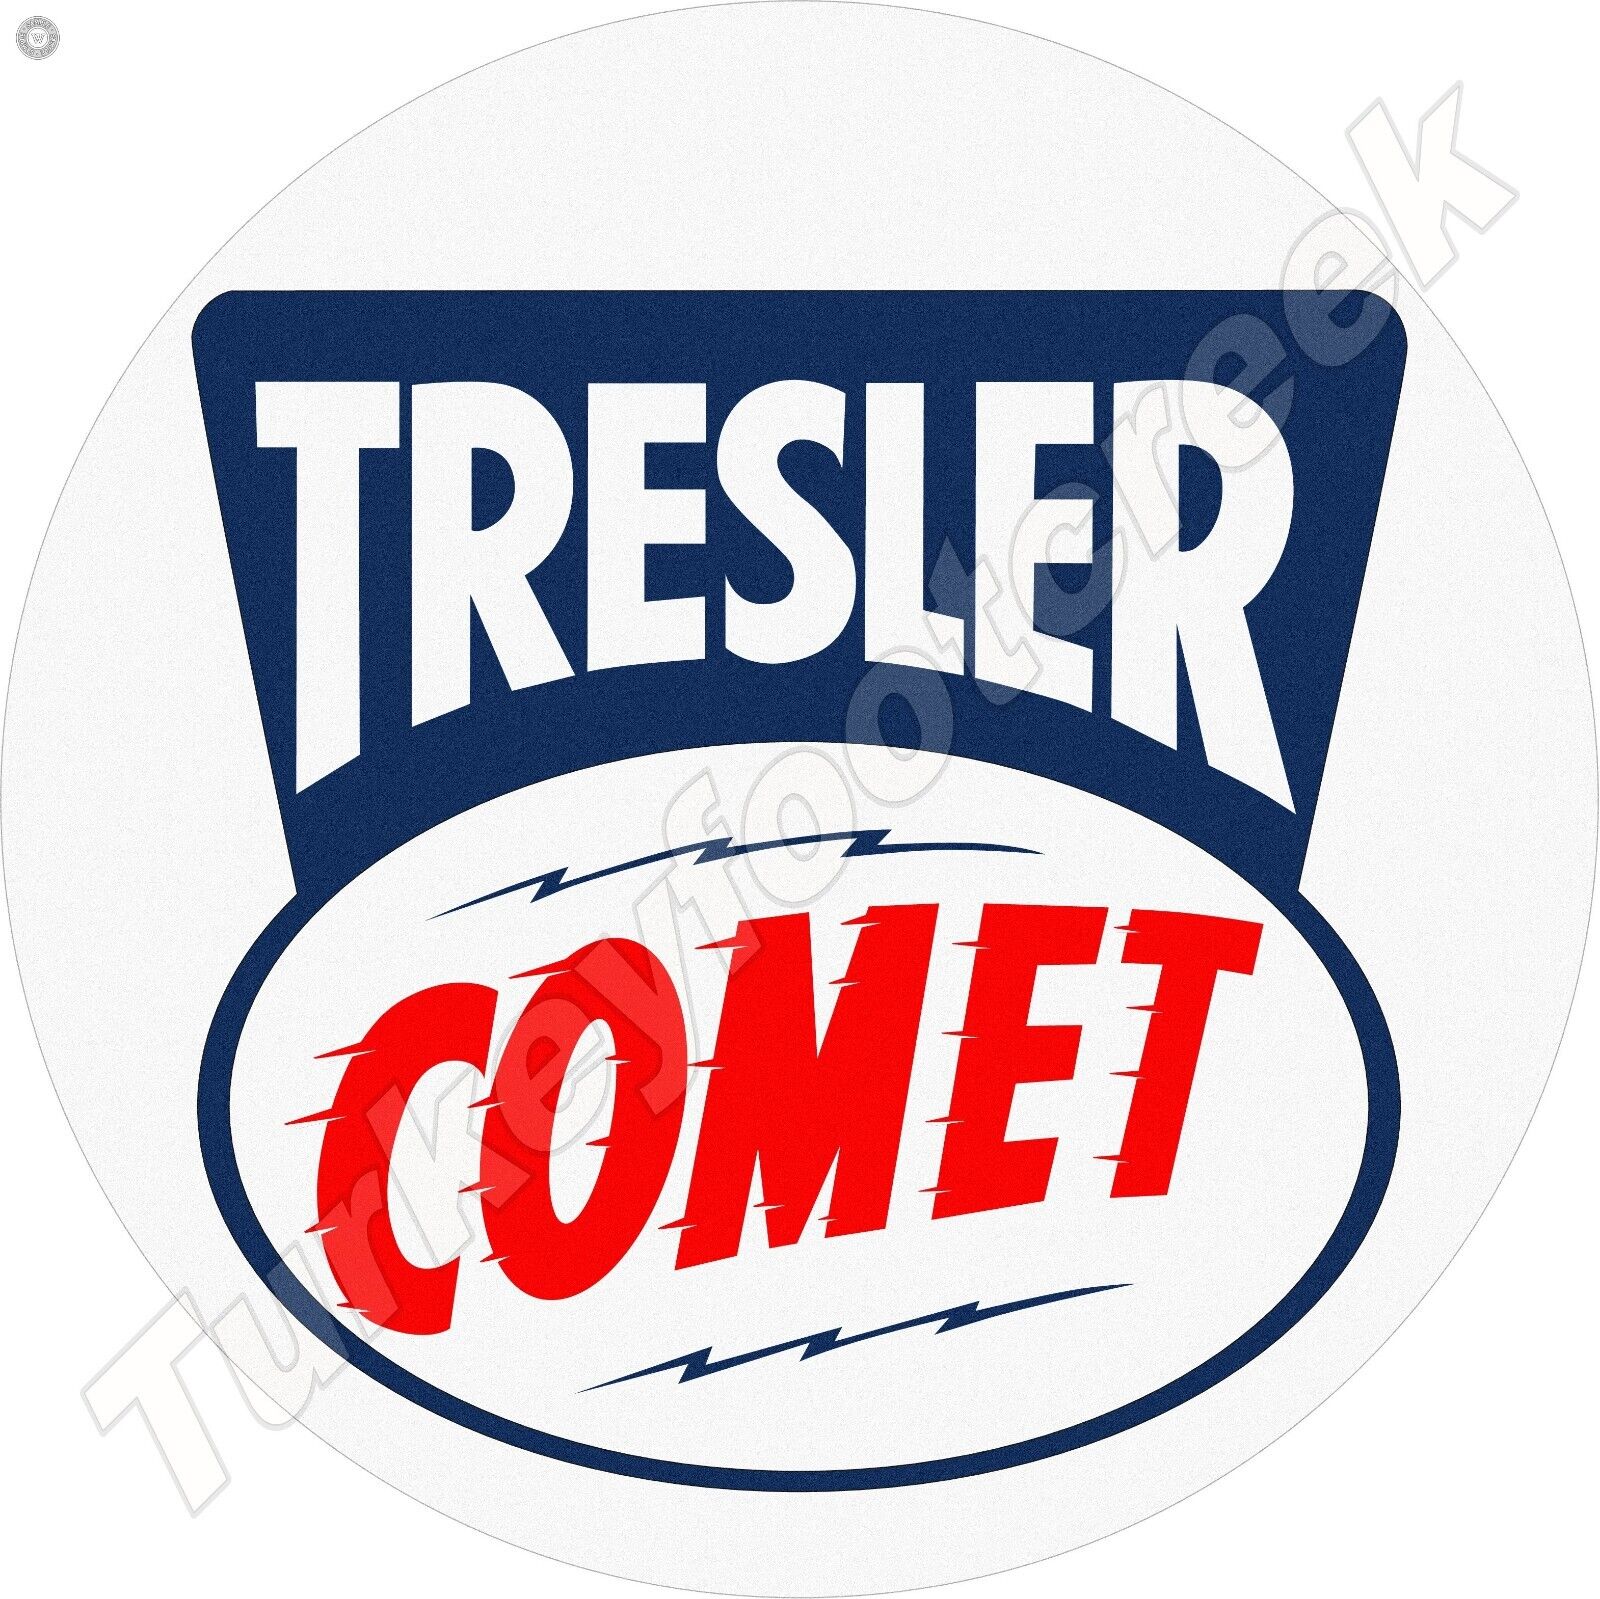 Tresler Comet Round Metal Sign 2 Sizes To Choose From